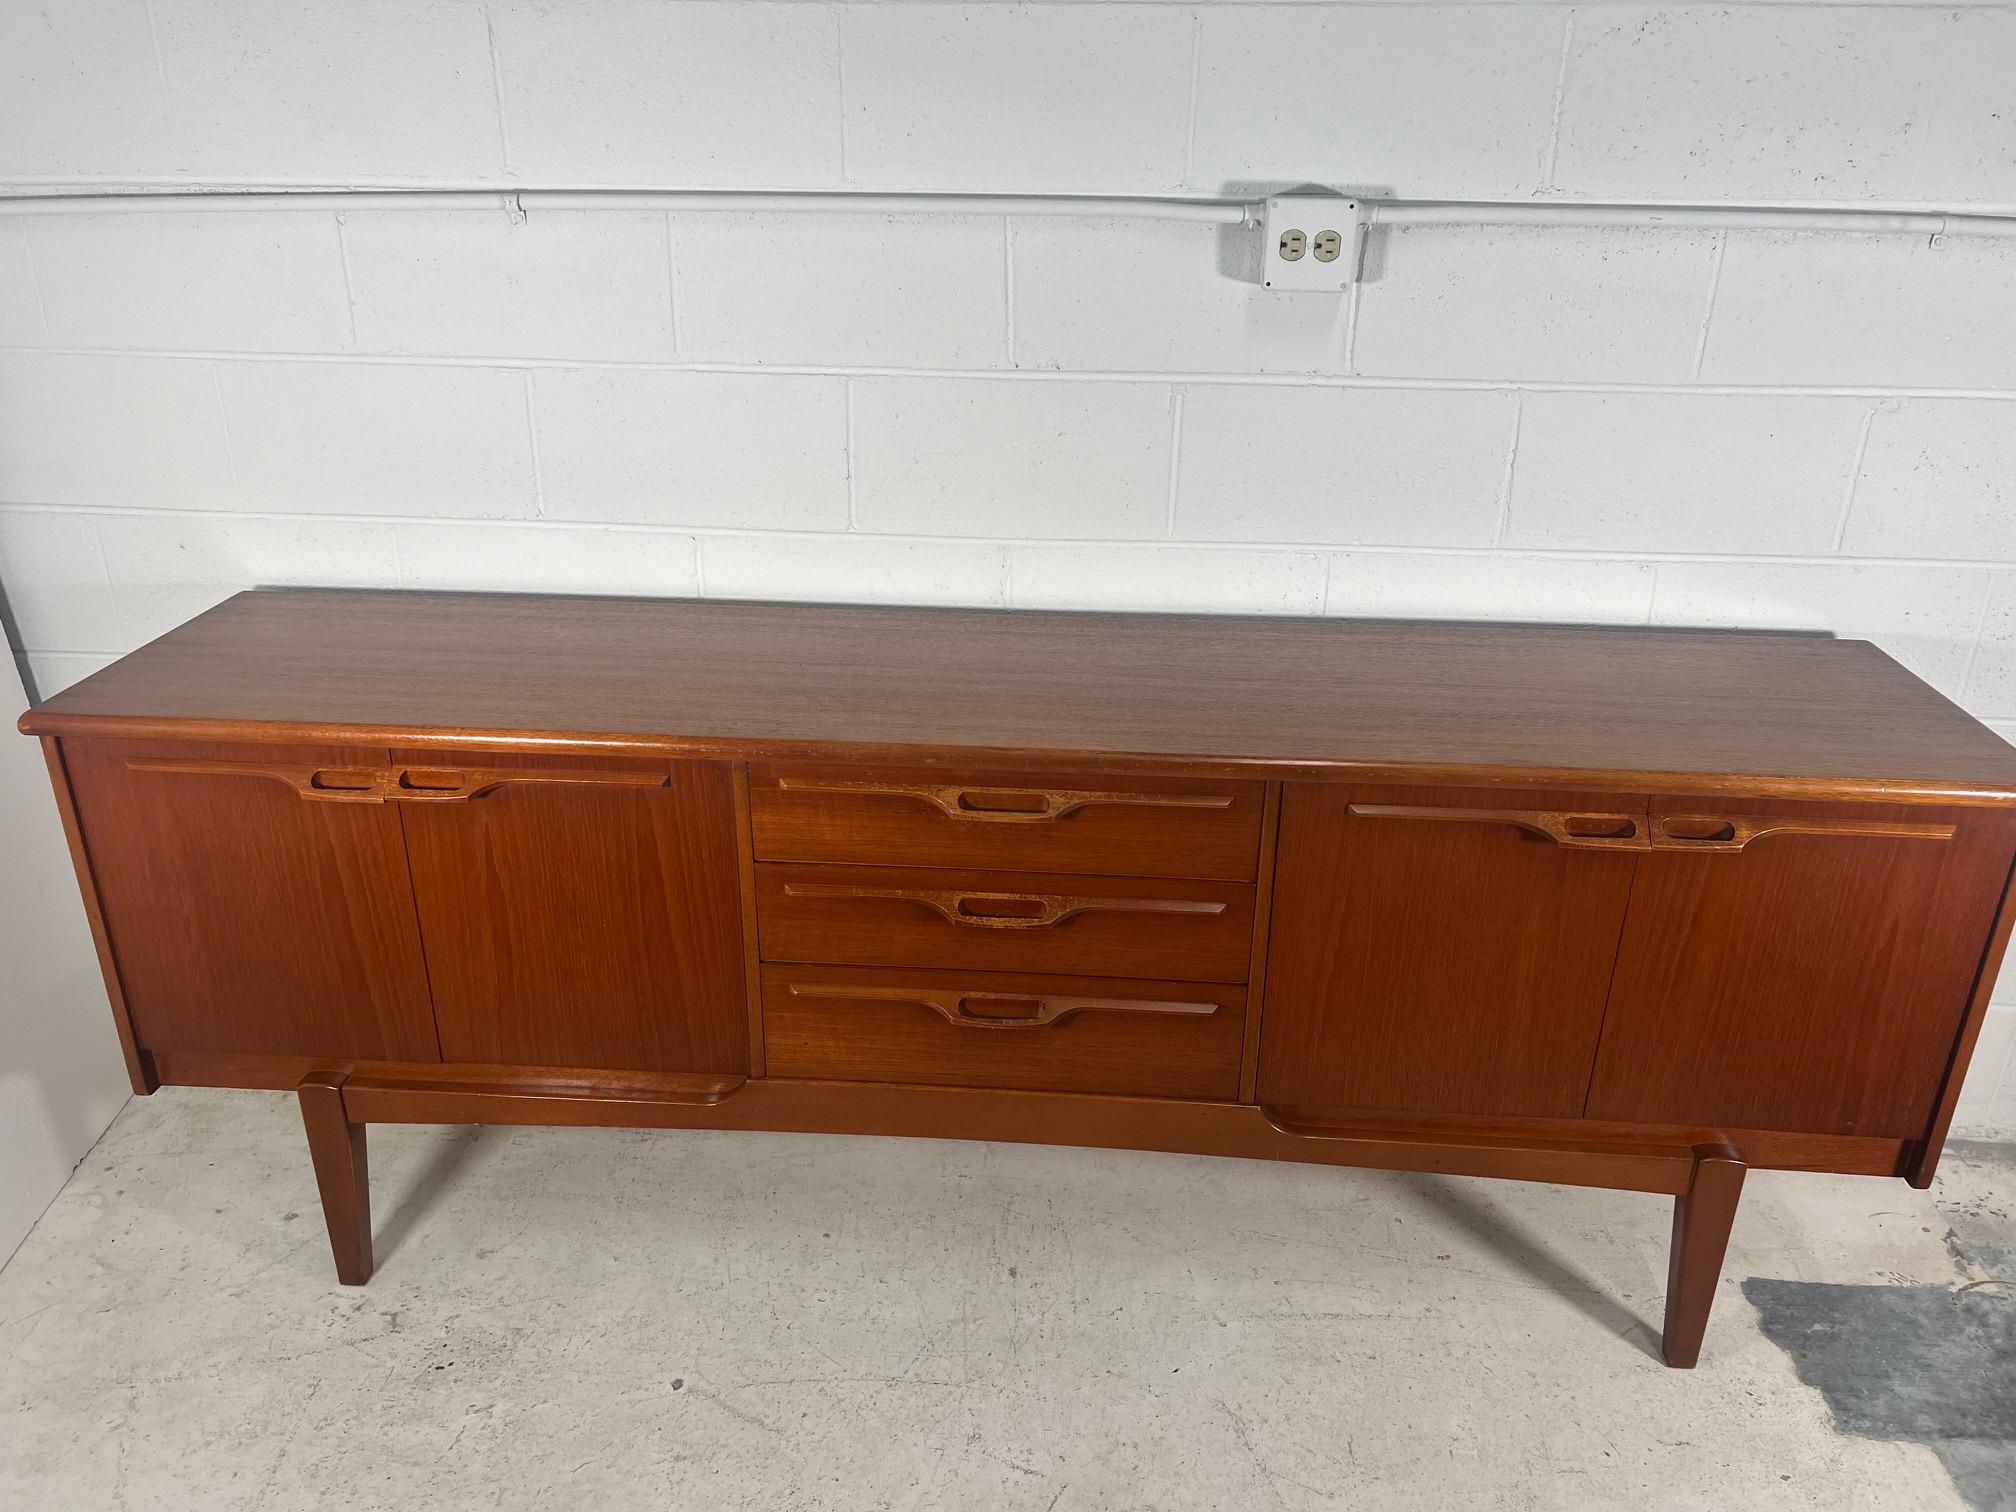 This stunning mid-century modern teak credenza by Jentique is a must-have for any stylish home. The rich brown color and sleek design make it a perfect addition to any room. With two shelves and ample space, it provides both style and functionality.